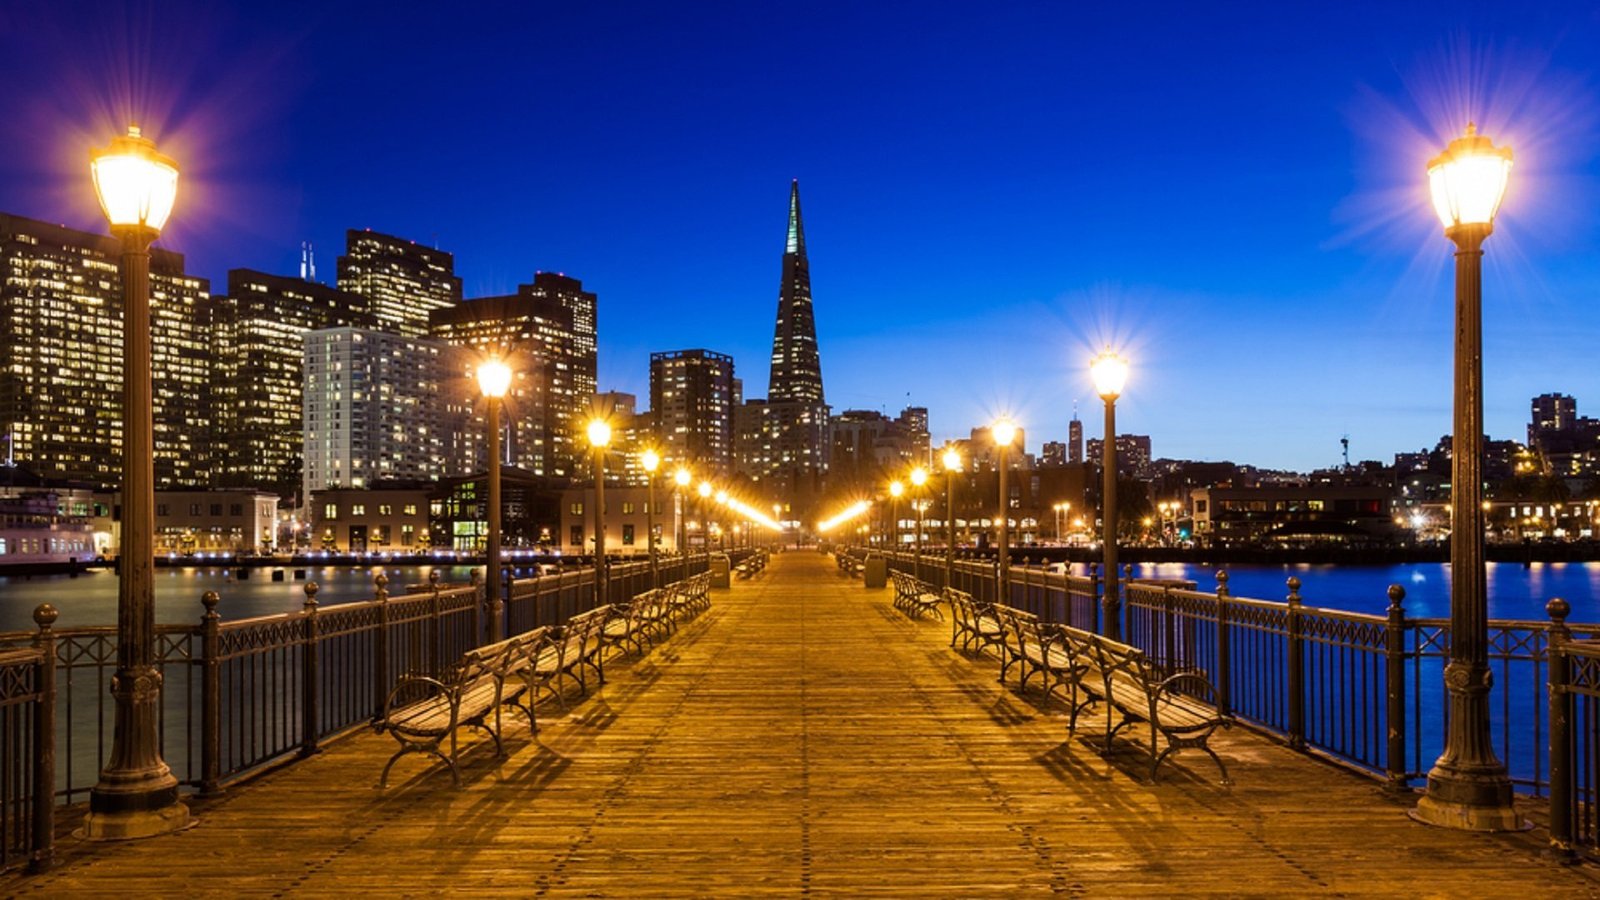 Vacation Travel Guide To San Francisco Best Places To Visit In San Francisco Zen Tripstar travel trip usa north america